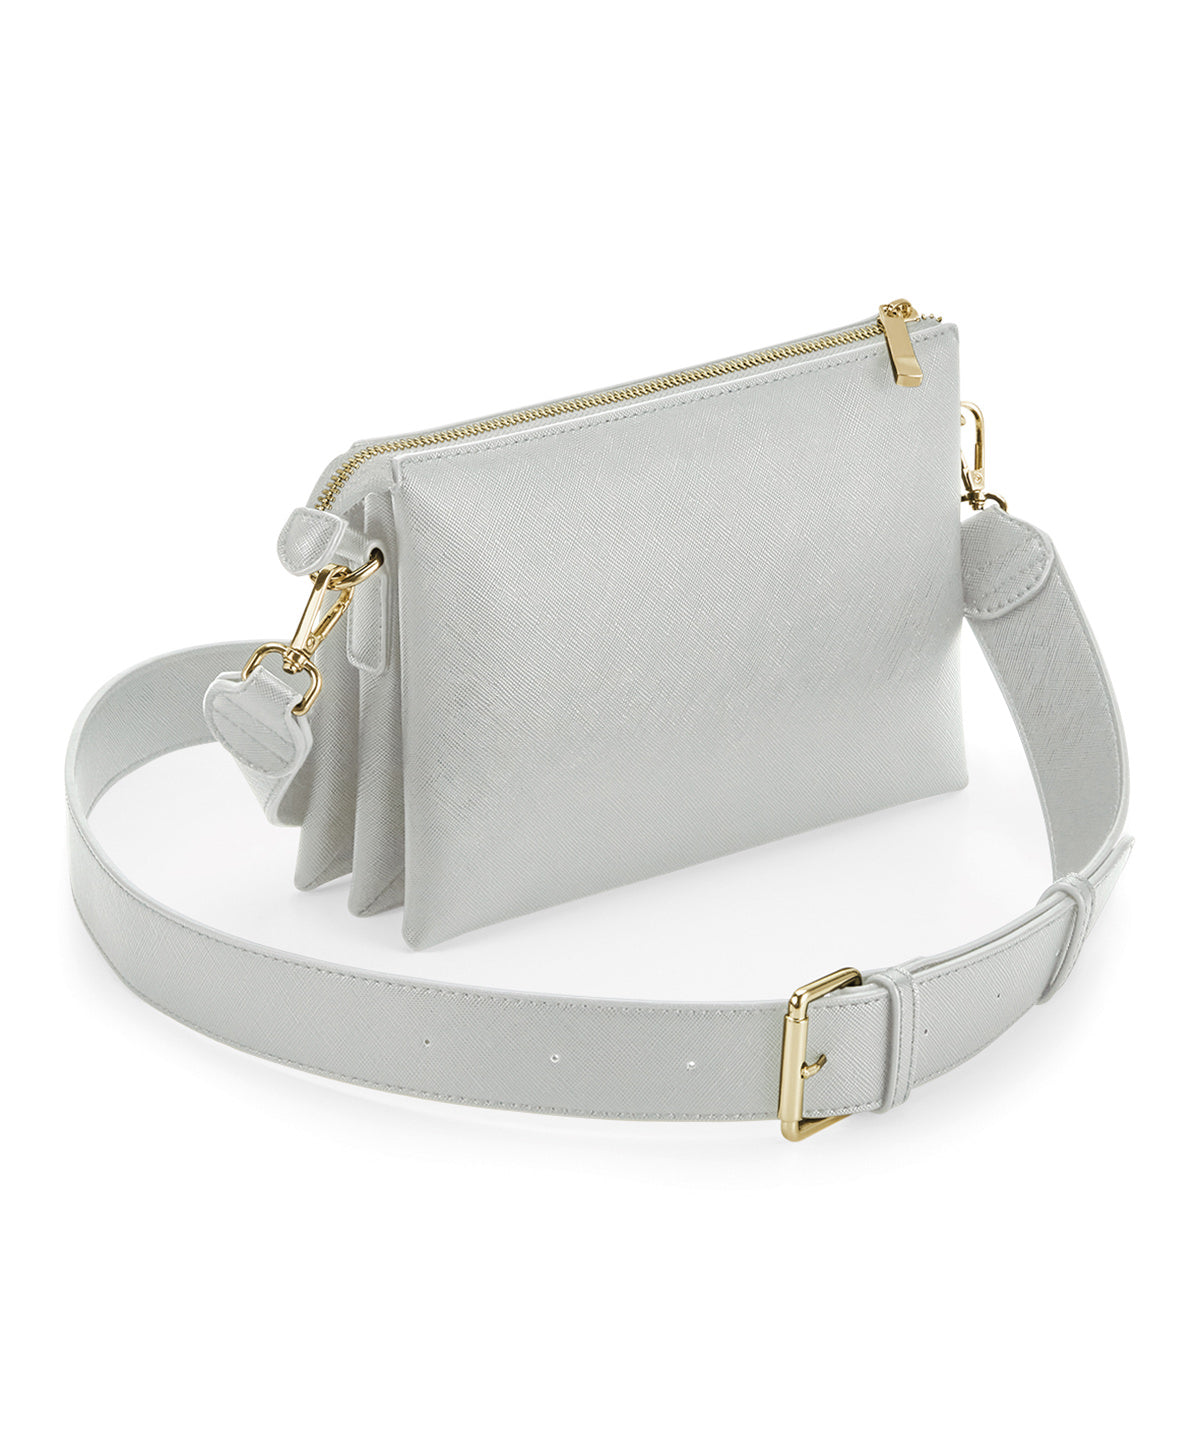 Personalised Bags - Light Grey Bagbase Boutique soft cross-body bag